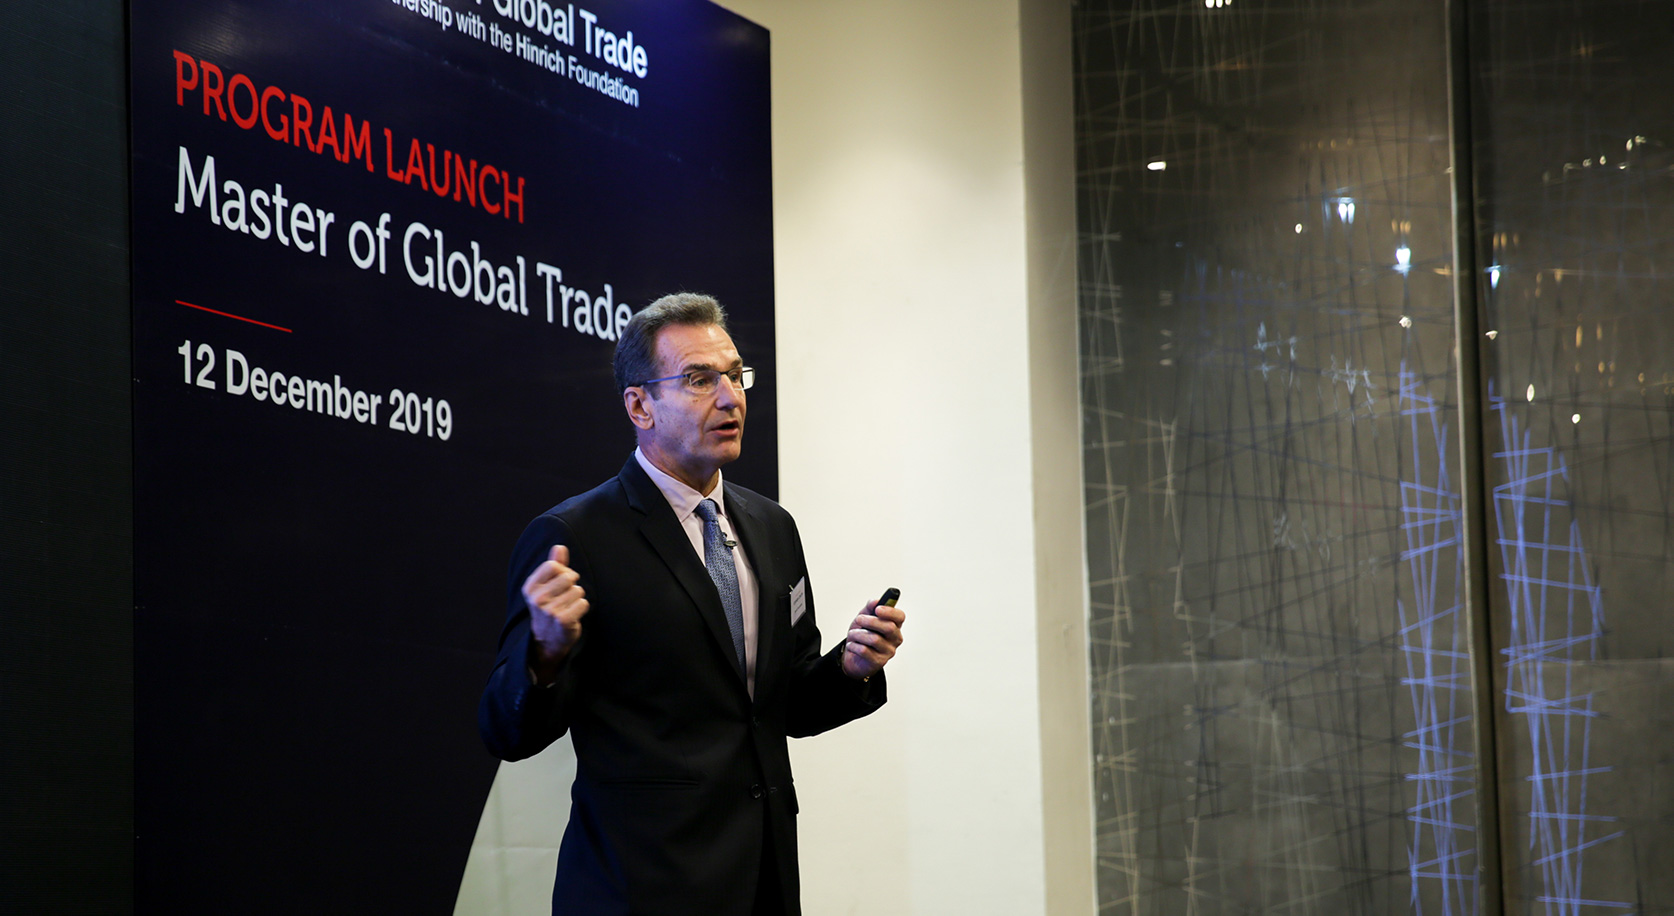 Mr Stephen Olson, a Research Fellow at the Hinrich Foundation, urged policymakers and trade observers to keep a few key factors in mind when assessing the impacts on Vietnam at the Master of Global Trade roundtable discussion.